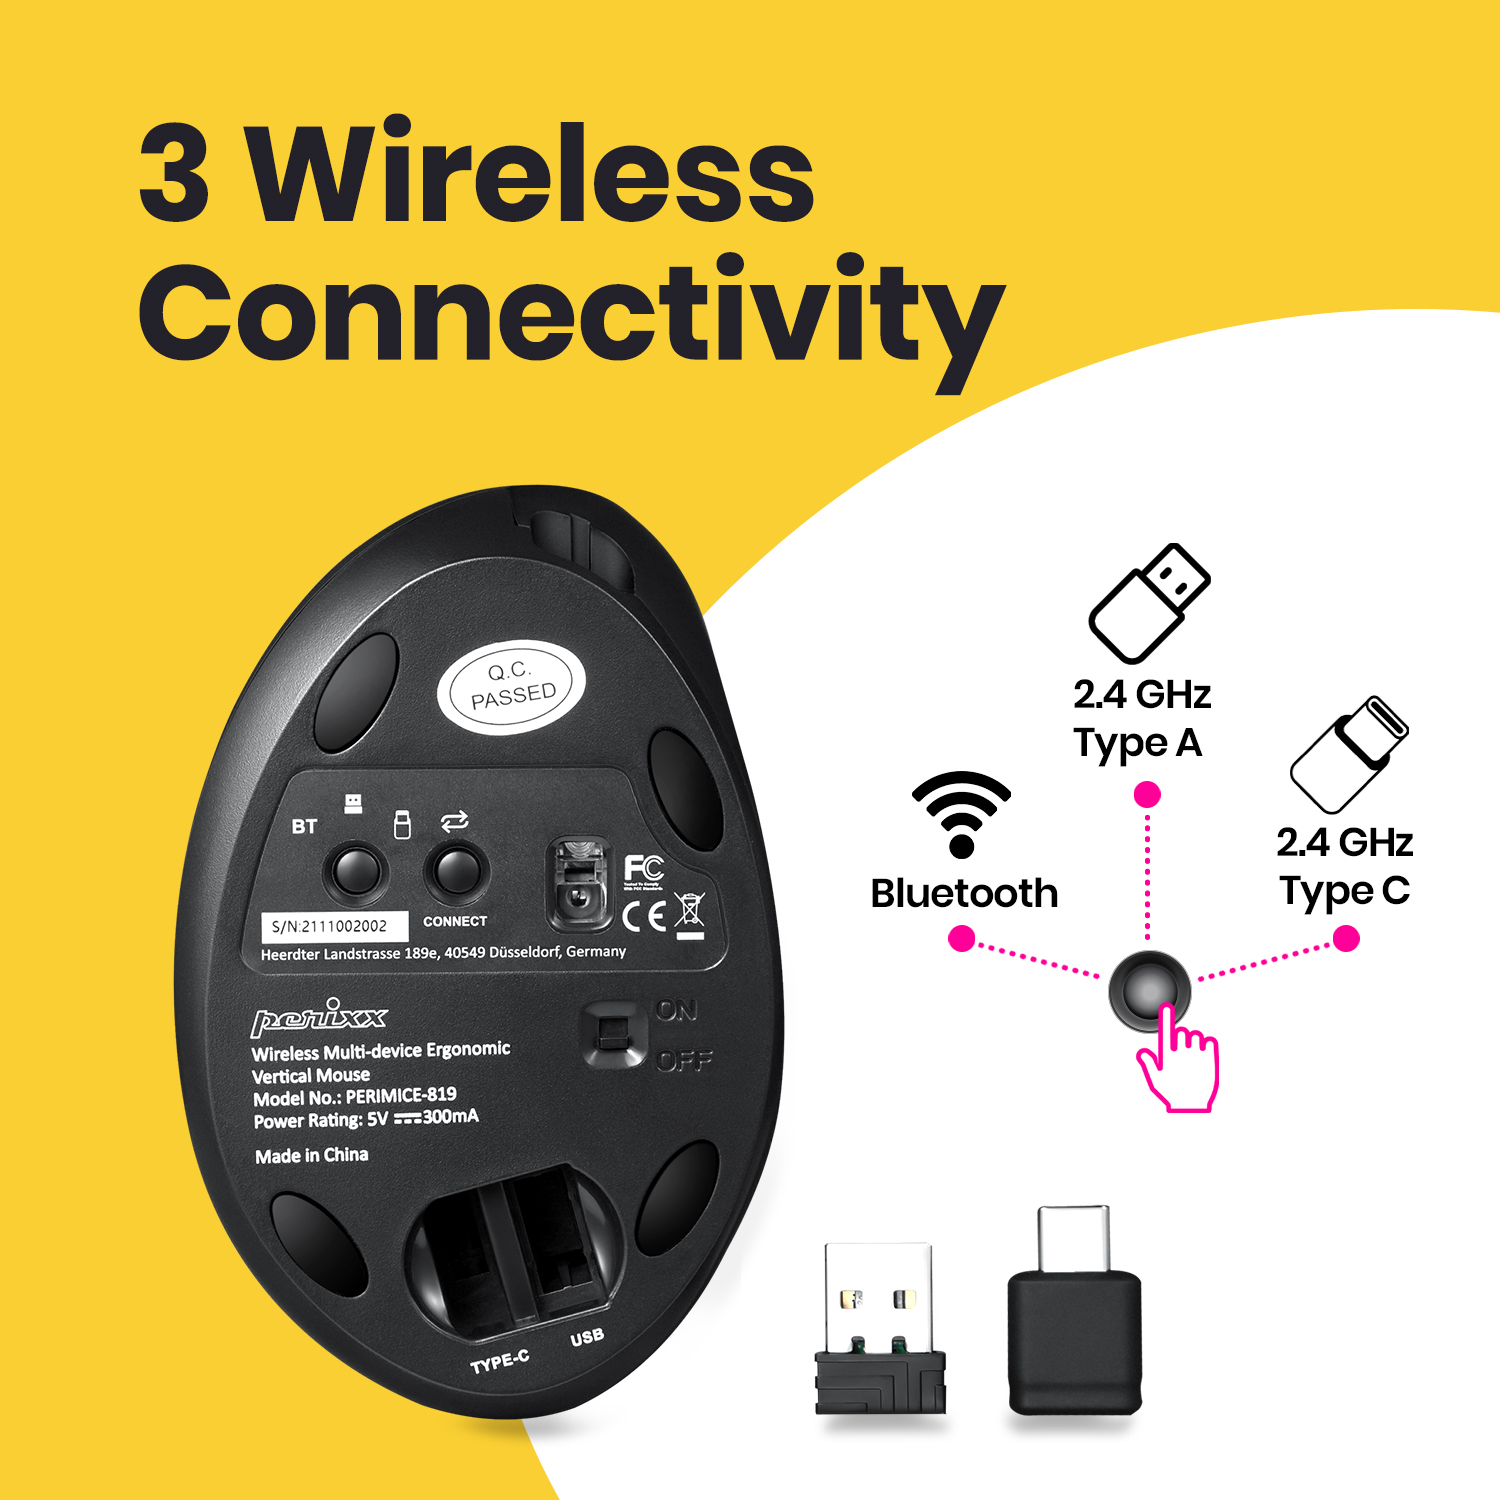  WORK ANYWHERE WITH WIRELESS FREEDOM